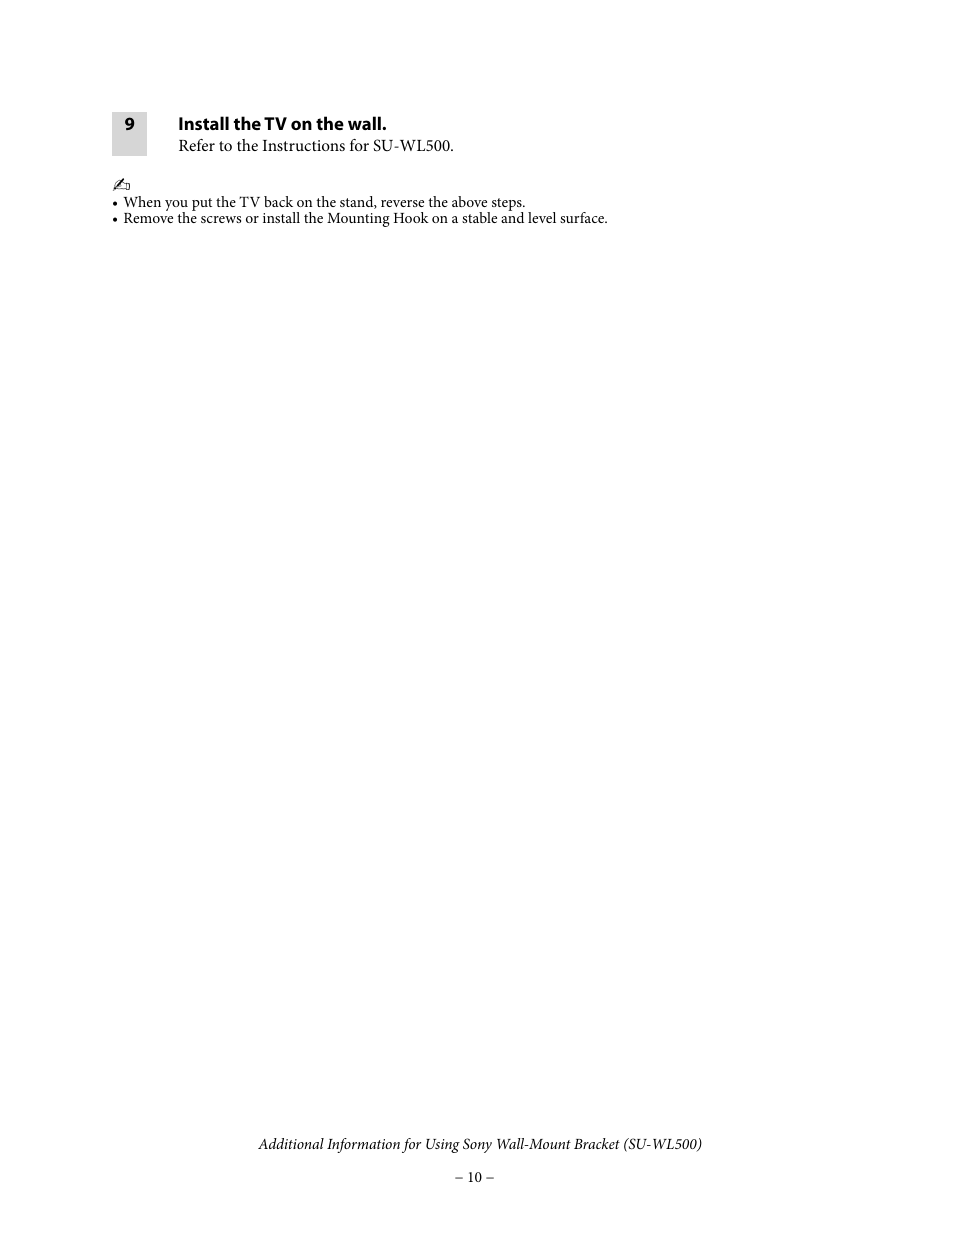 Sony KDL-46EX700 User Manual | Page 10 / 10